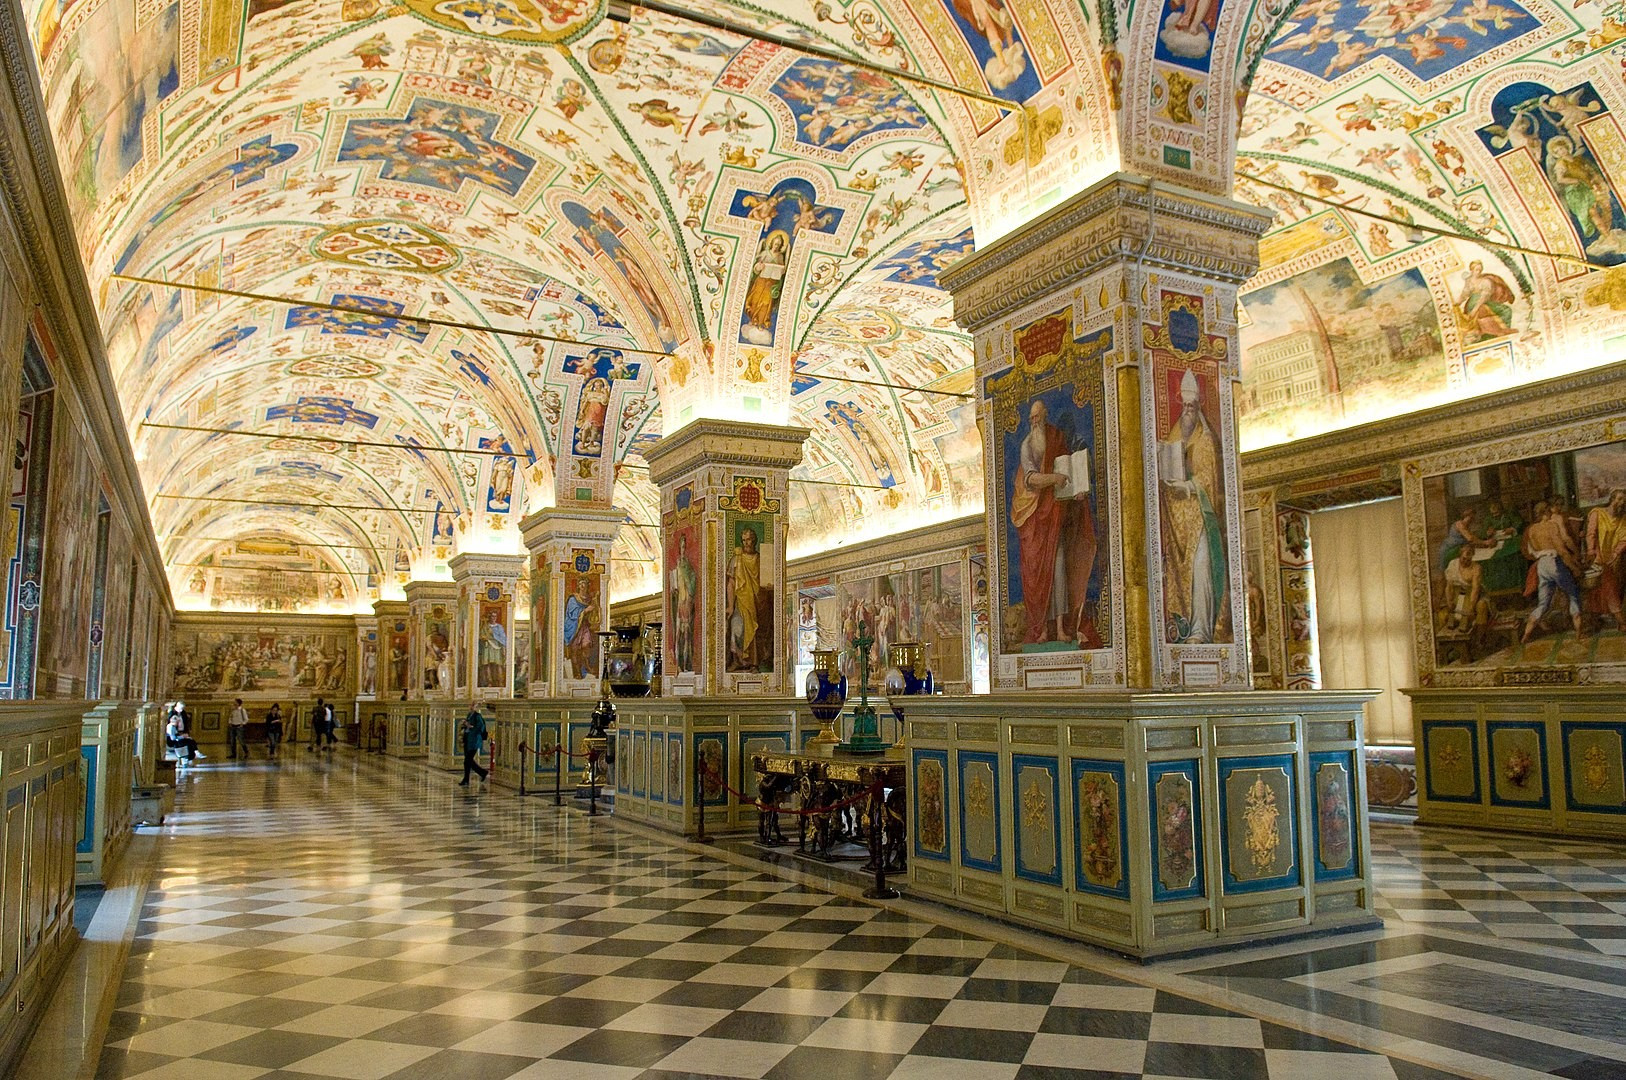 By Michal Osmenda from Brussels, Belgium - The Sistine Hall of the Vatican Library, CC BY-SA 2.0, https://commons.wikimedia.org/w/index.php?curid=24417300